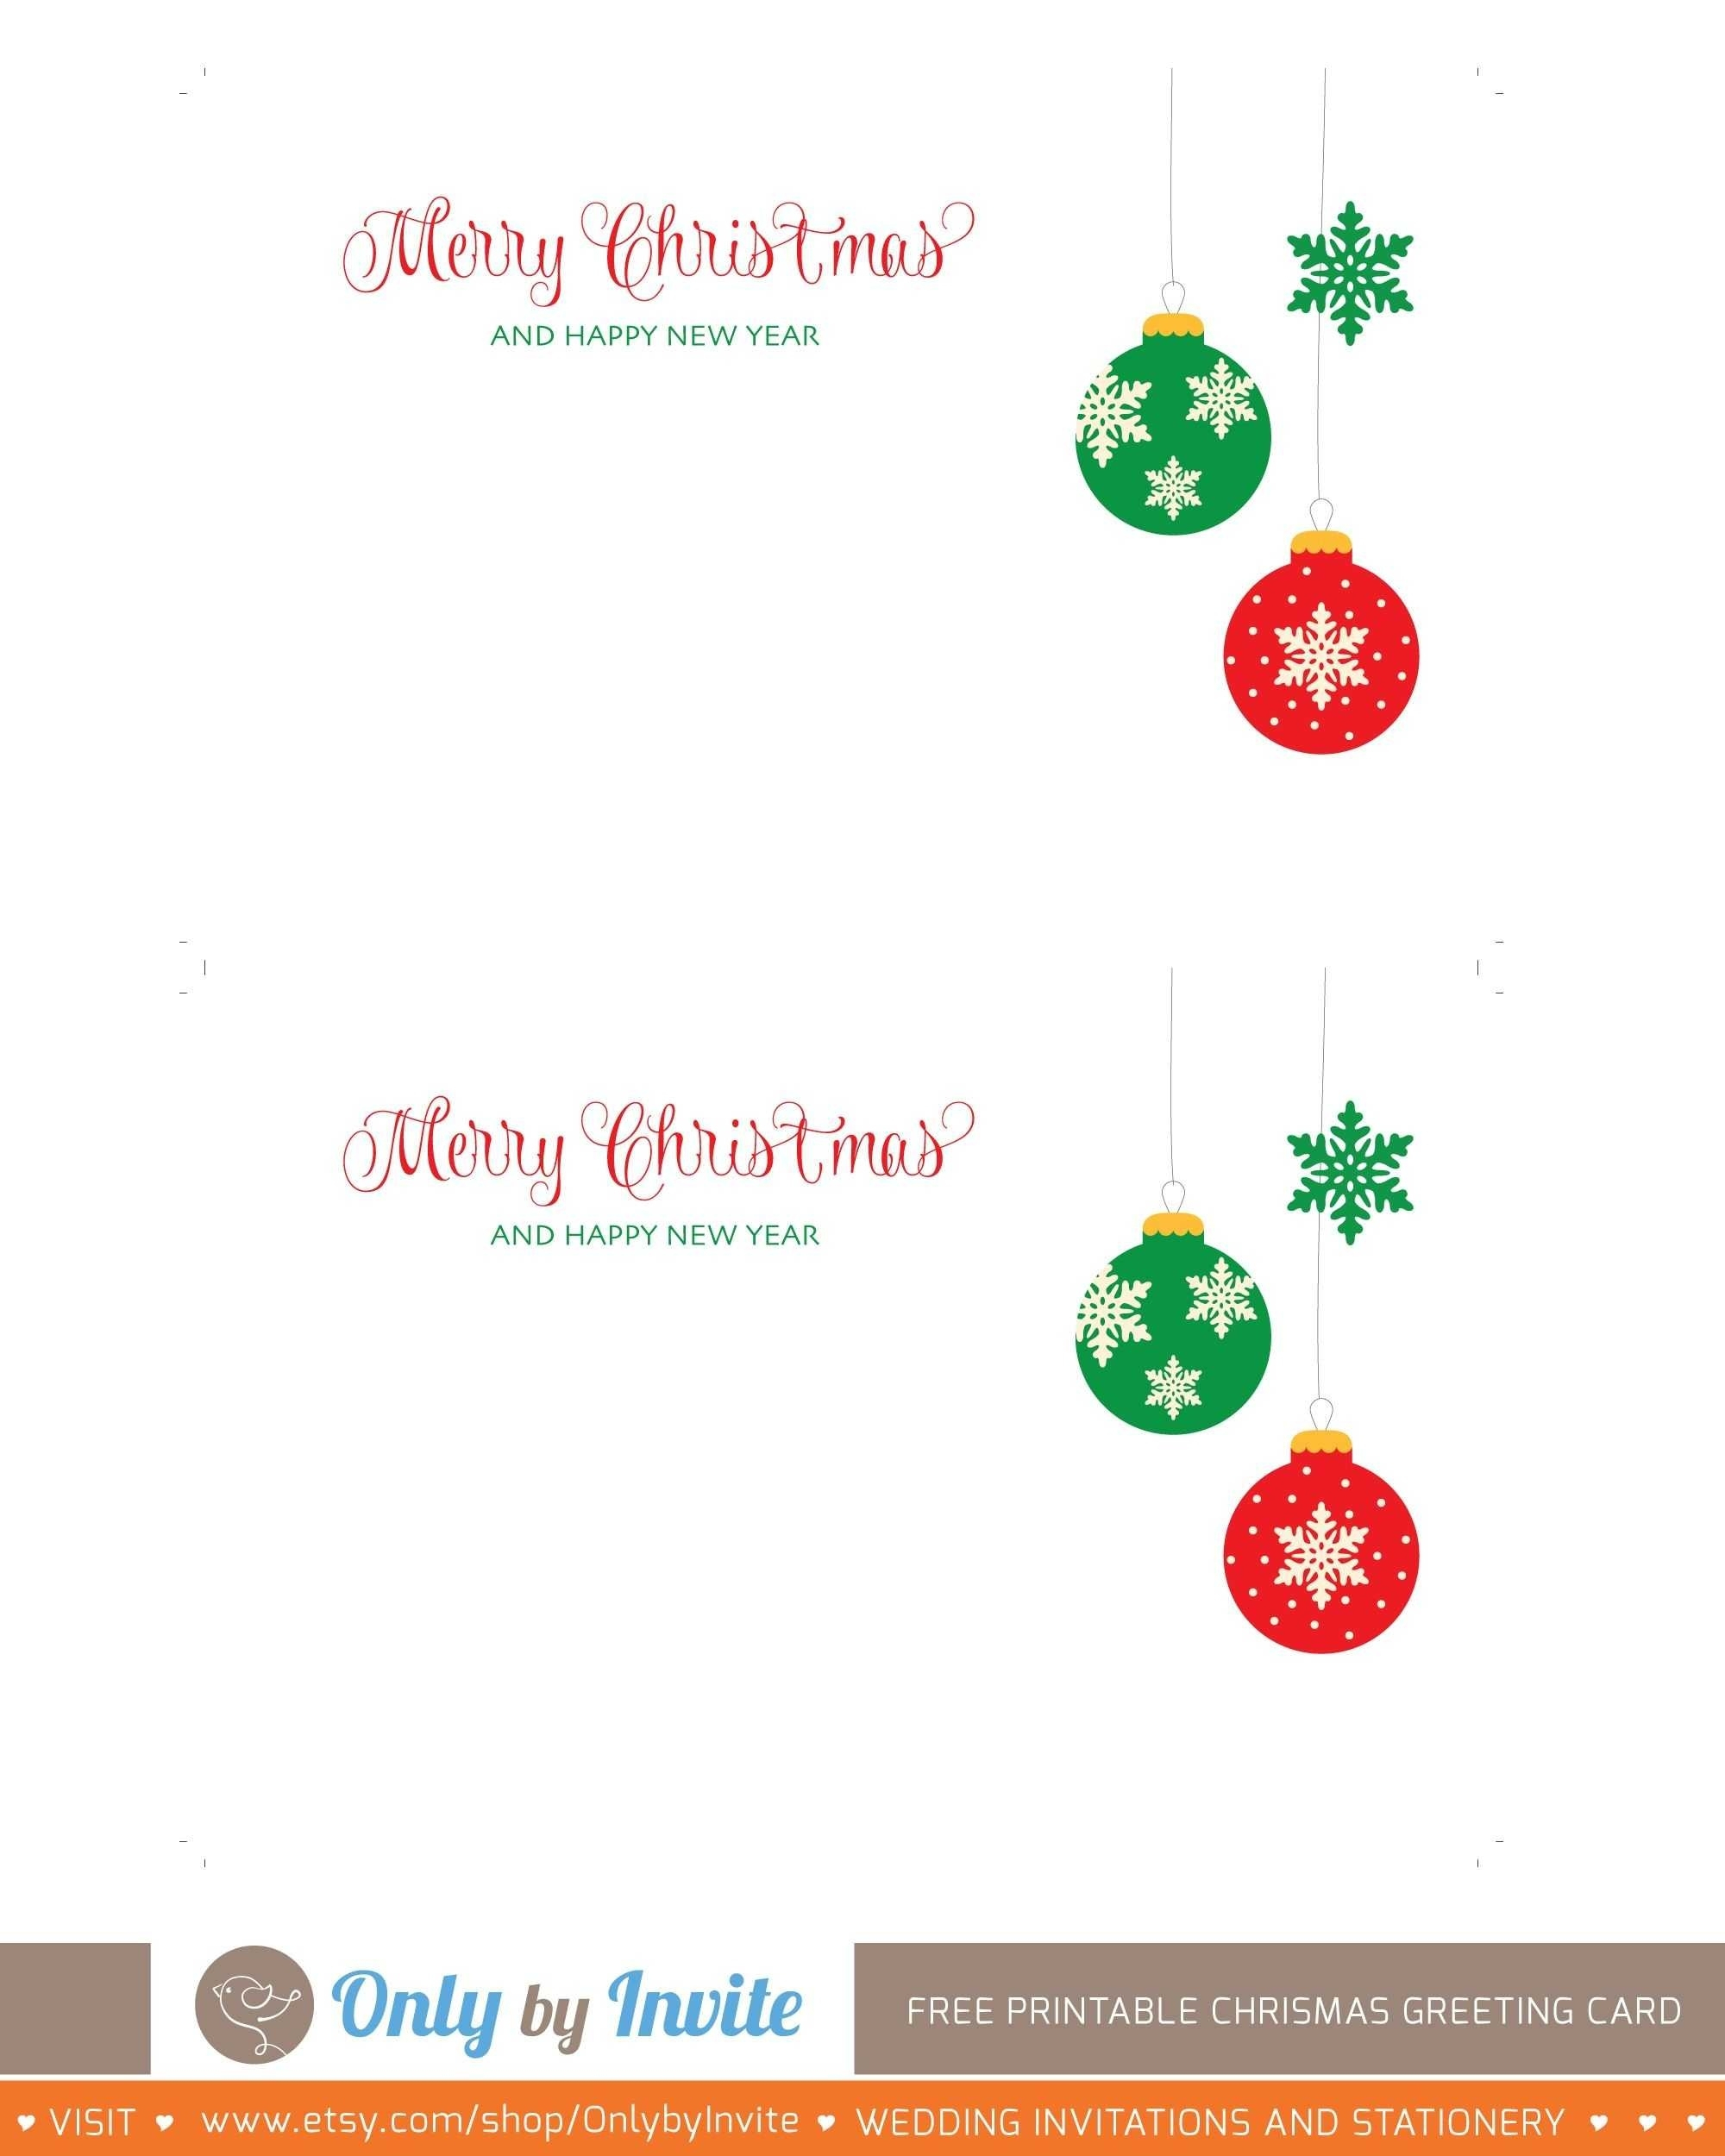 Template Greeting Card Free Printable | World Of Label - Free Printable Military Greeting Cards